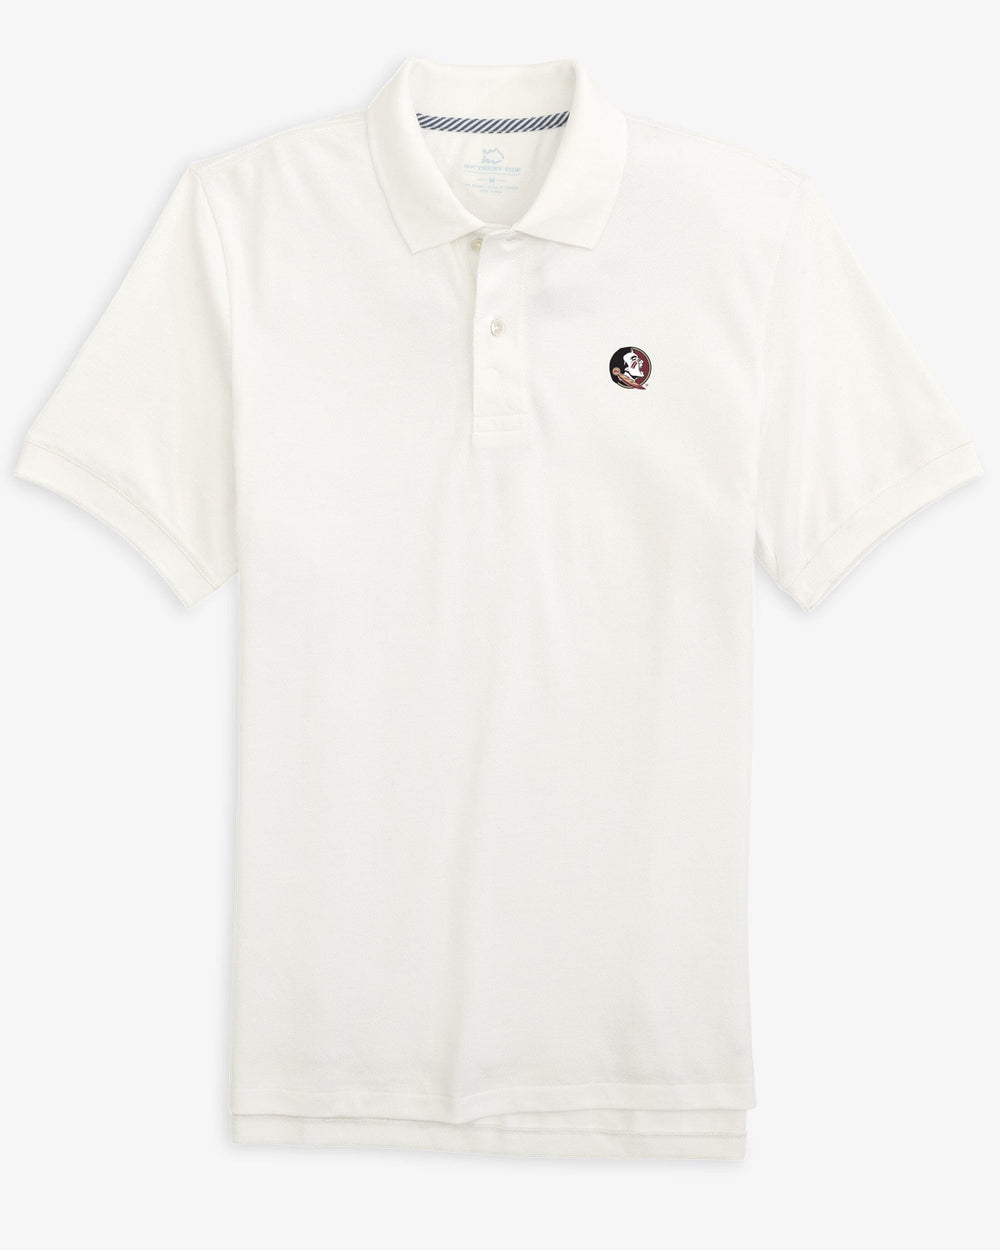 The front view of the FSU Seminoles Skipjack Polo by Southern Tide - Classic White